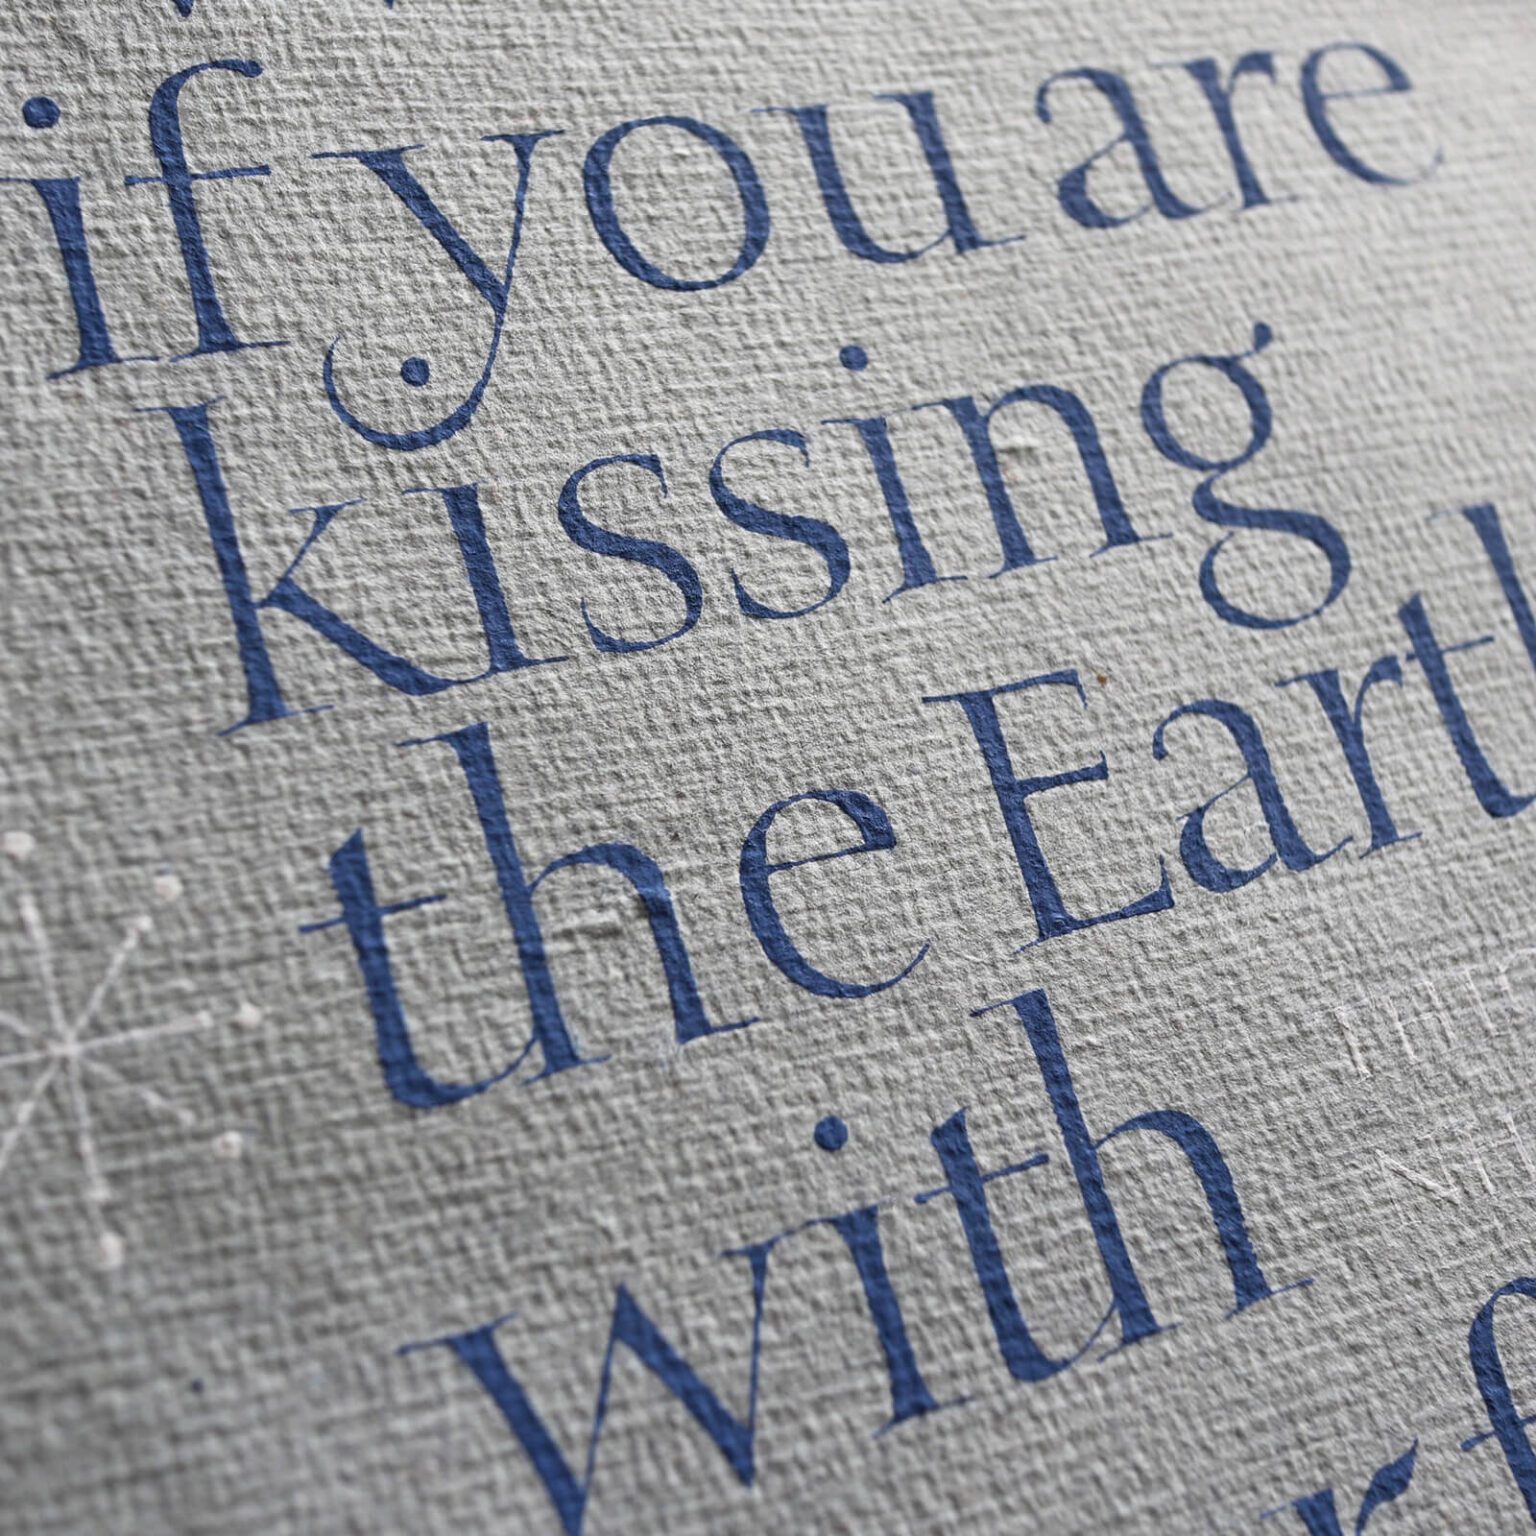 Kissing the Earth - Yukimi Annand Art and Calligraphy